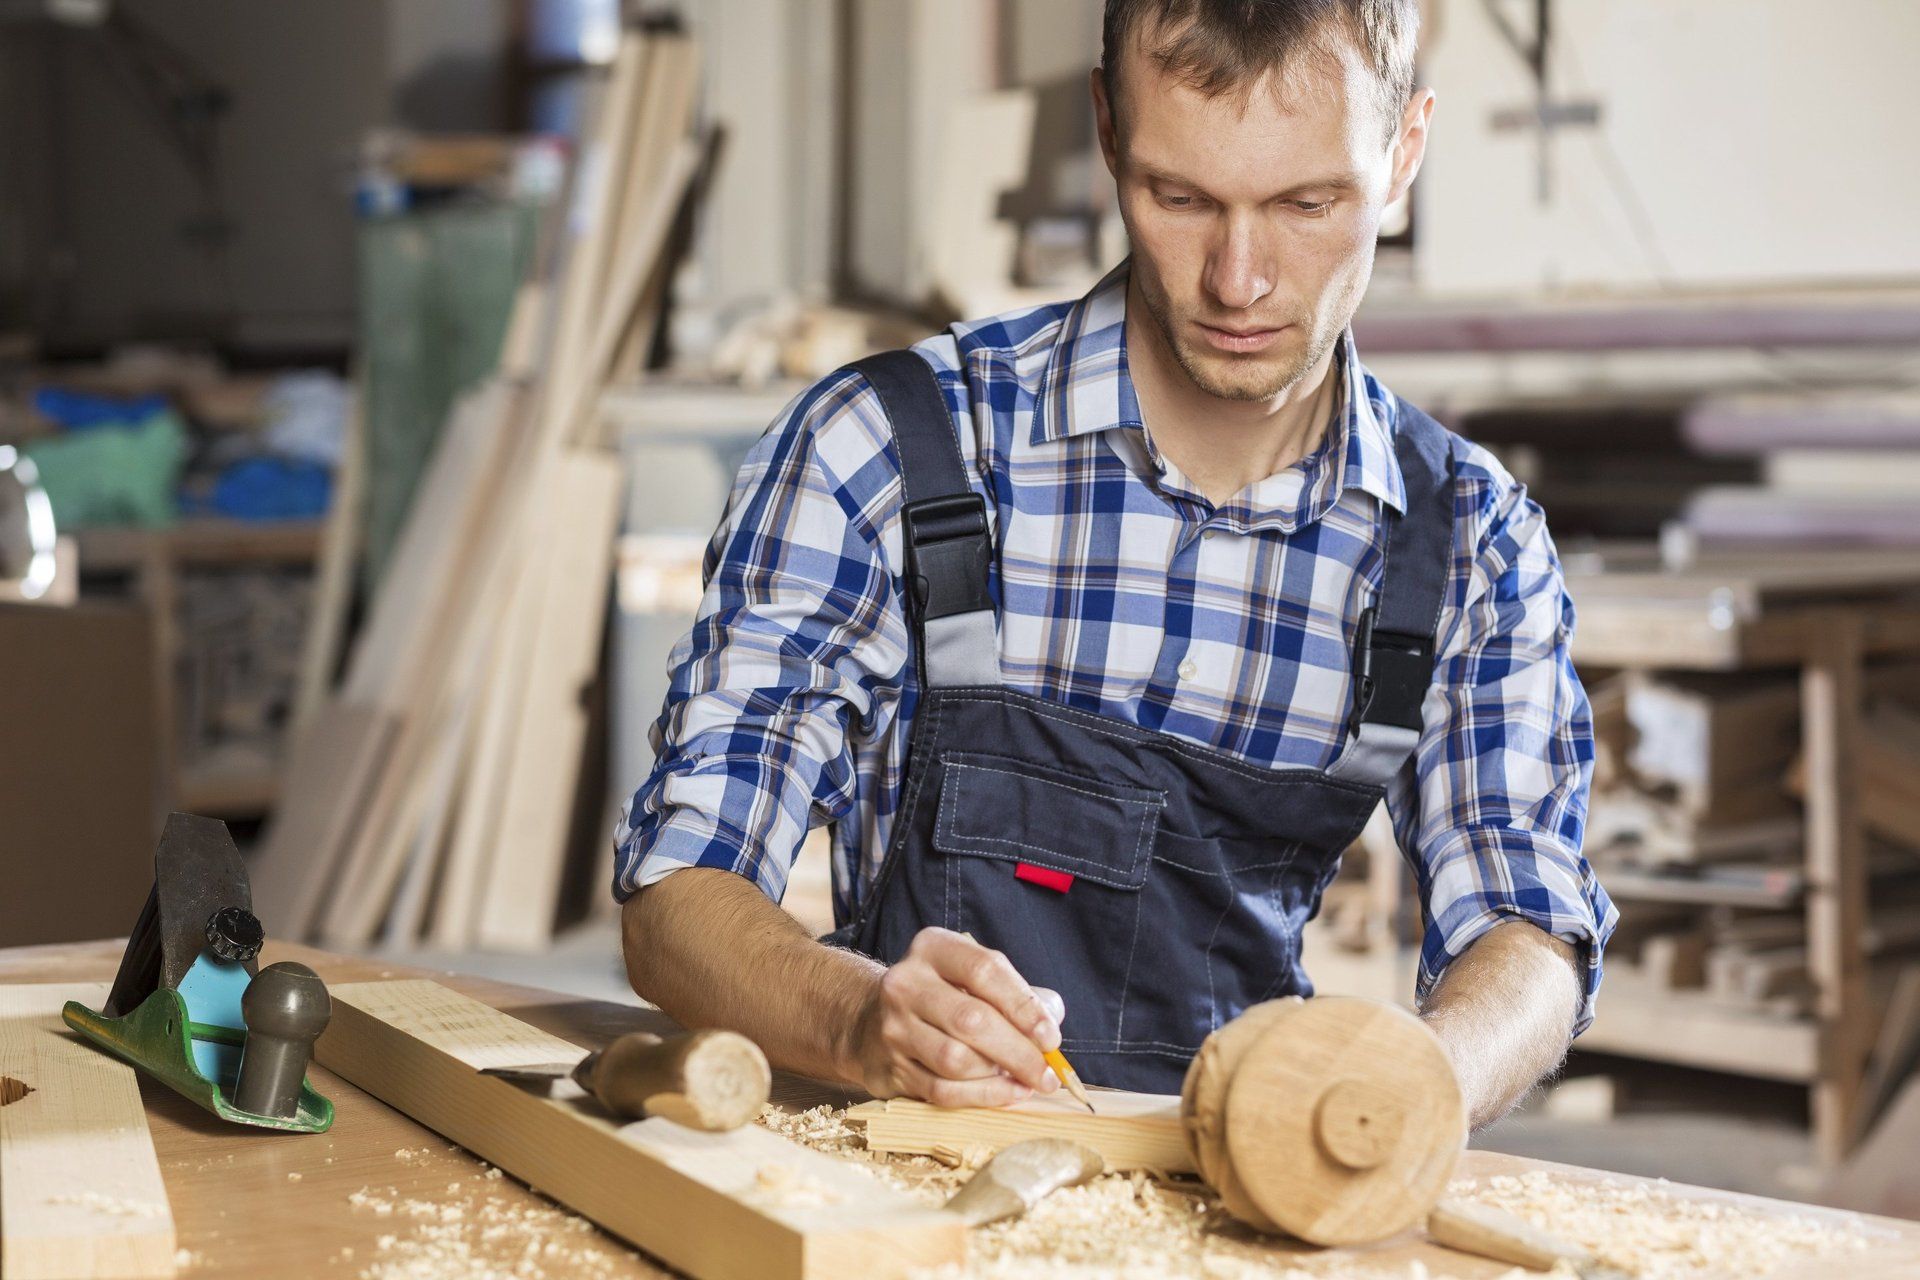 A woodworker in a checkered shirt working in his workshop